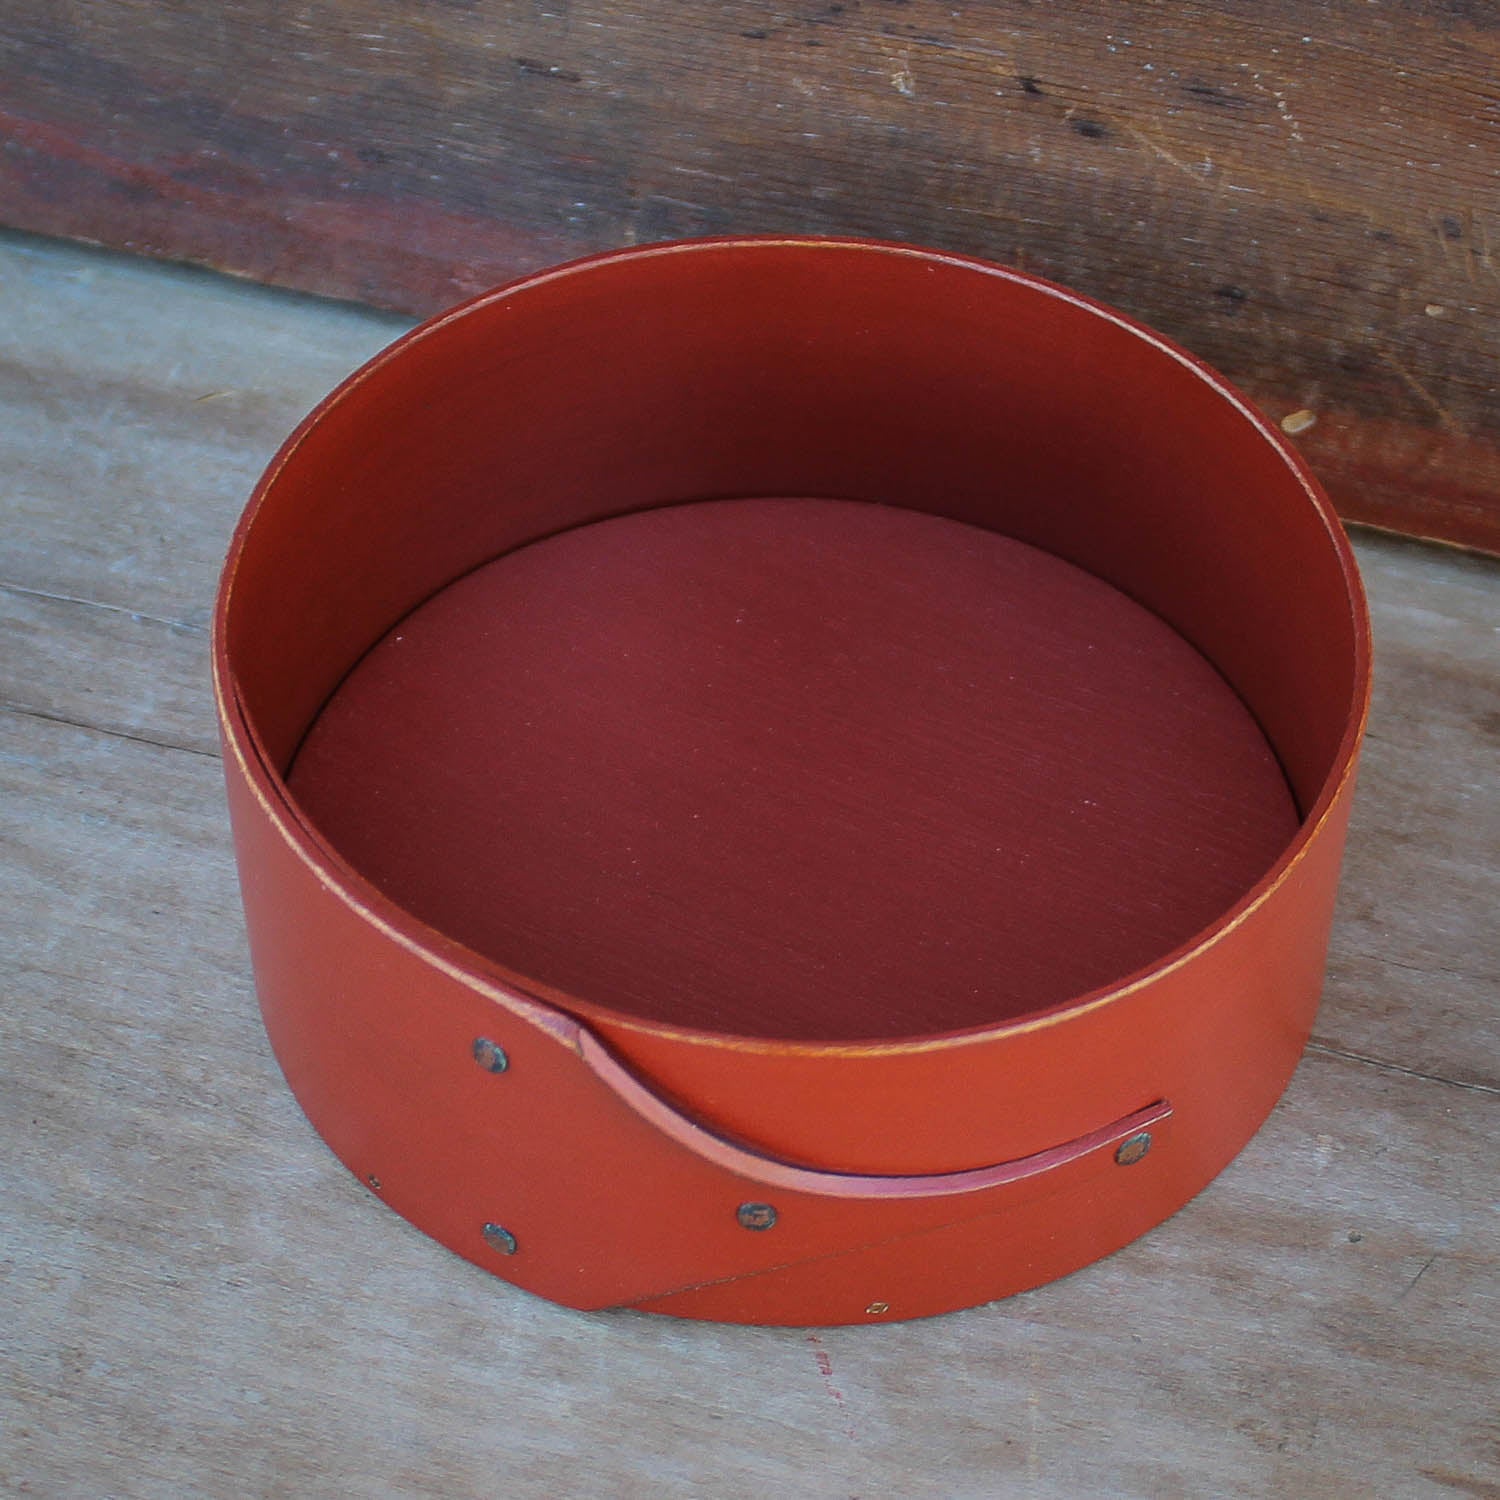 Shaker Style Pin Cushion Base for Needlework, LeHays Shaker Boxes, Handcrafted in Maine, Red Milk Paint Finish, Top View